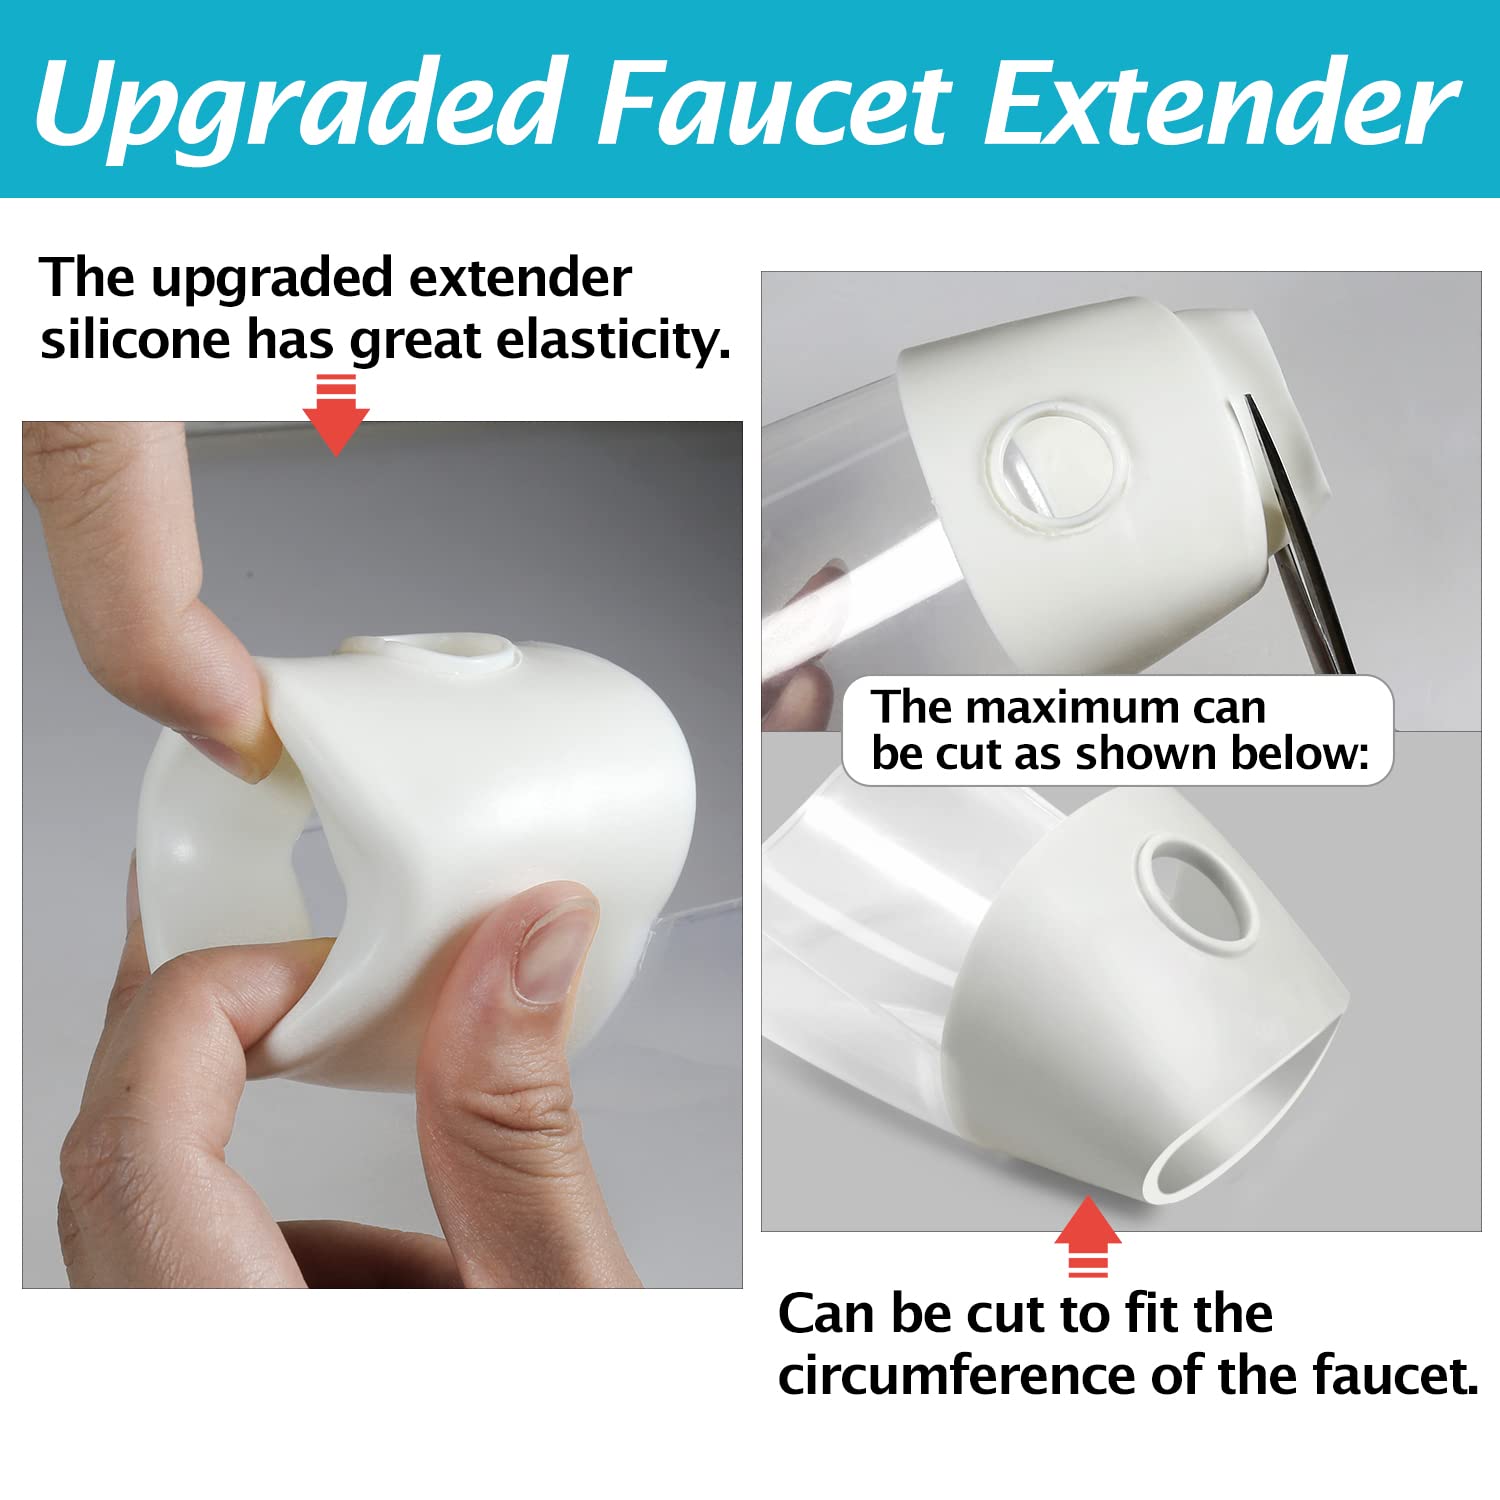 Faucet Extender, 2 Pack Faucet Extender for Toddlers, Bath Tub Faucet Extender for Kids Baby Children Hand Washing, Bathroom Kitchen Sink Spout Extender for Faucet, Fits Most Faucets (White)